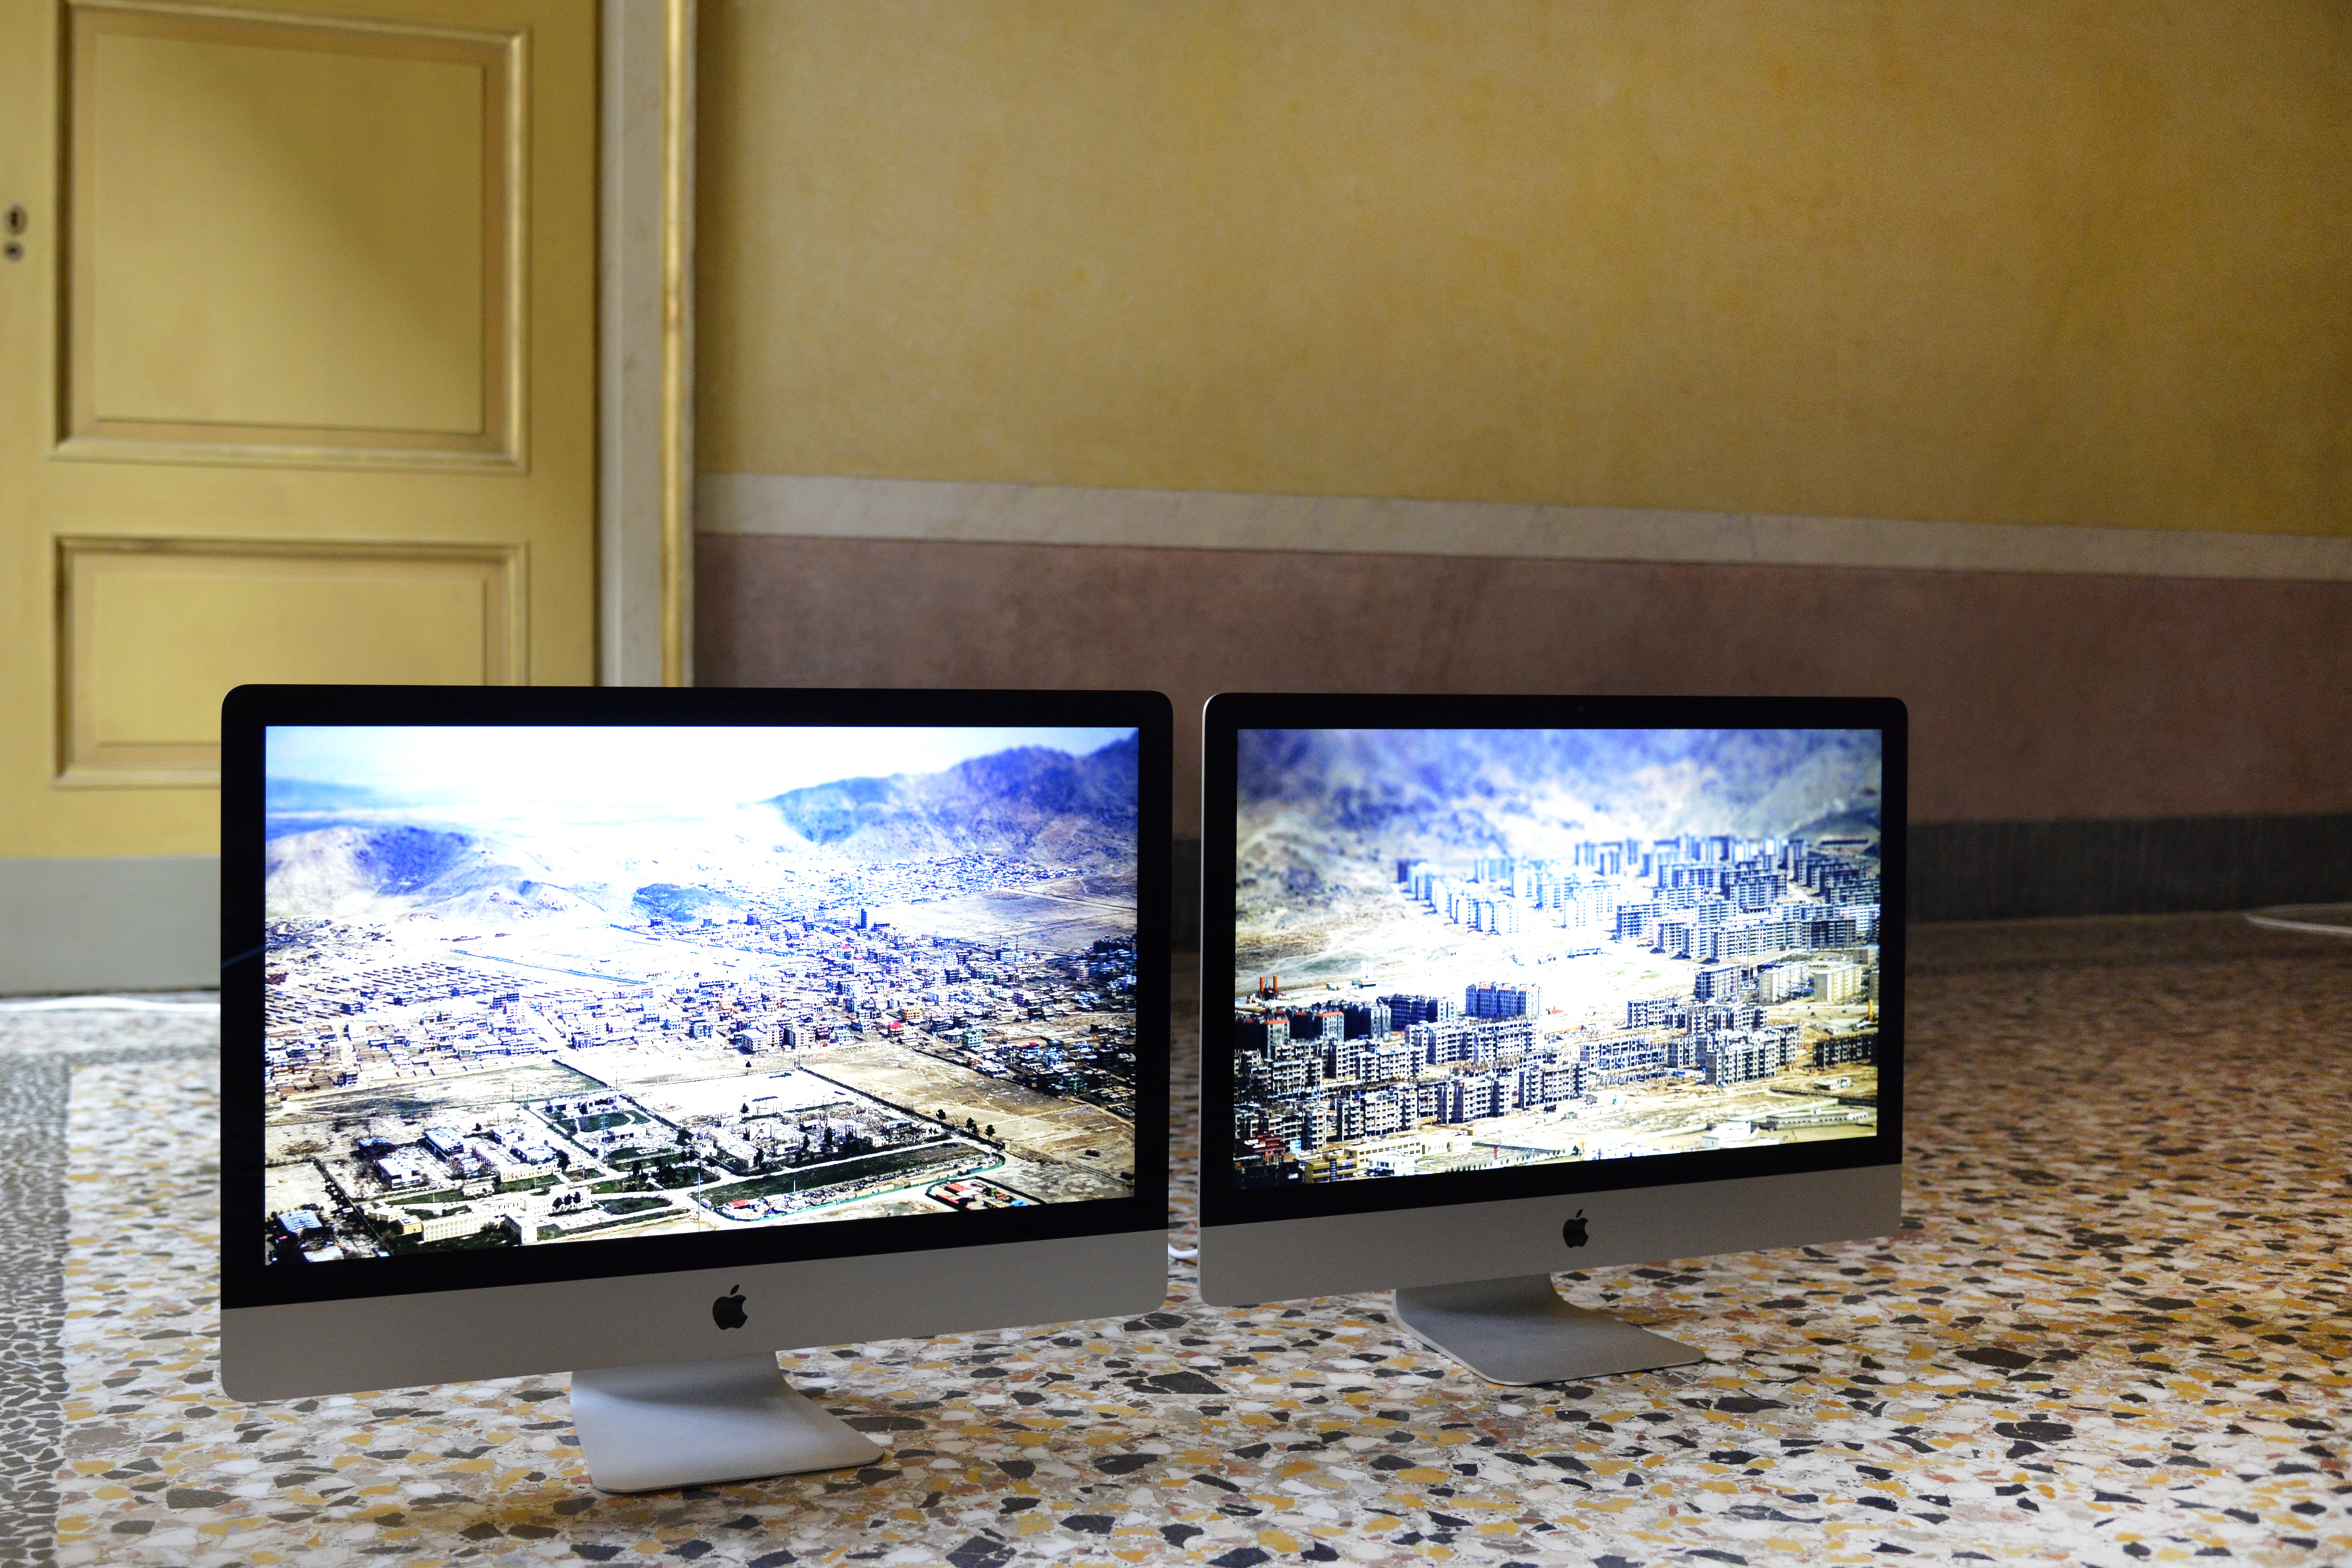 Massimo Grimaldi, EMERGENCY's Maternity Centre in Anabah, Photos Shown on Two Apple iMac Quad-Core i5s, 2014